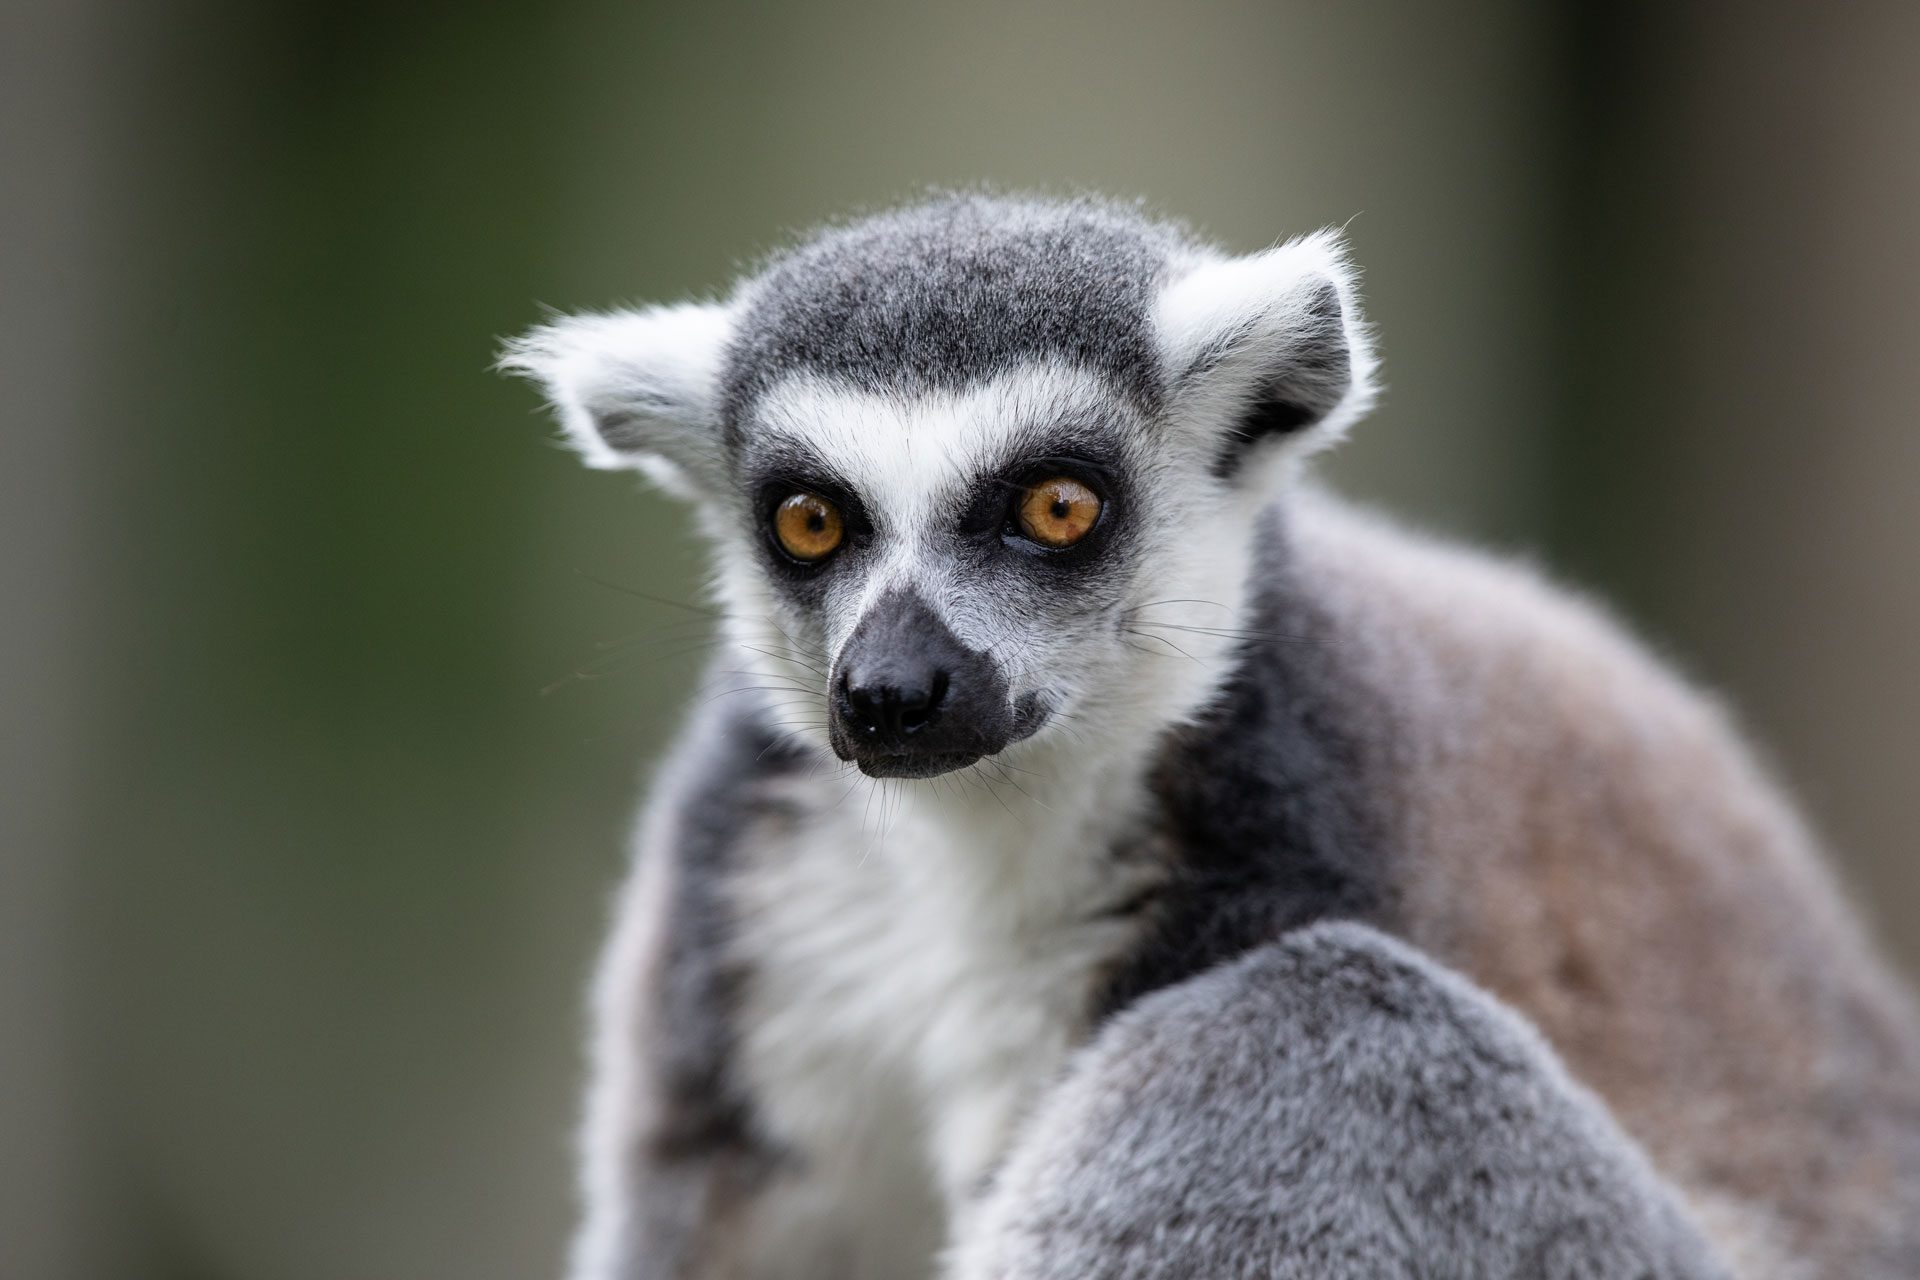 A close of a ring tailed lemur at emerald park zoo